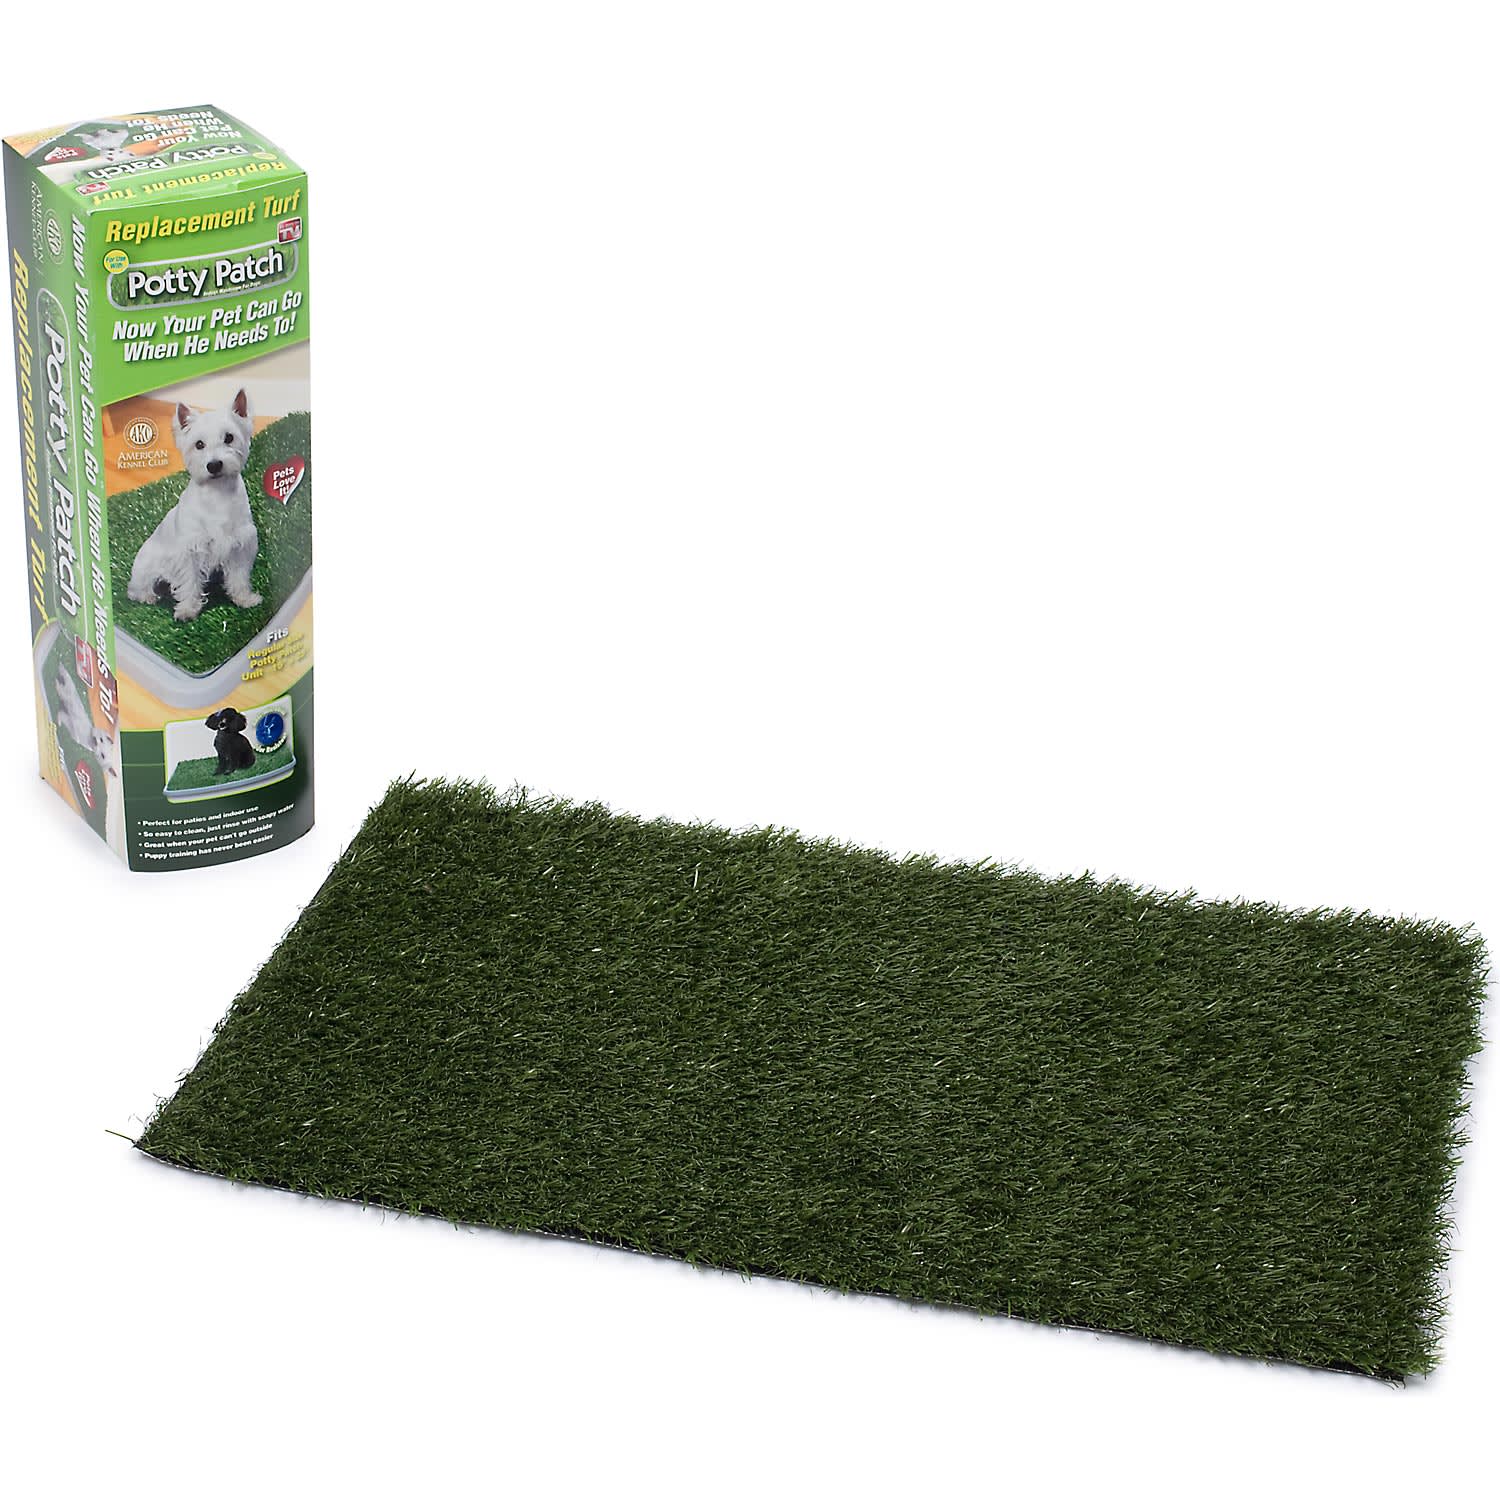 Potty Patch Replacement Turf - As Seen 